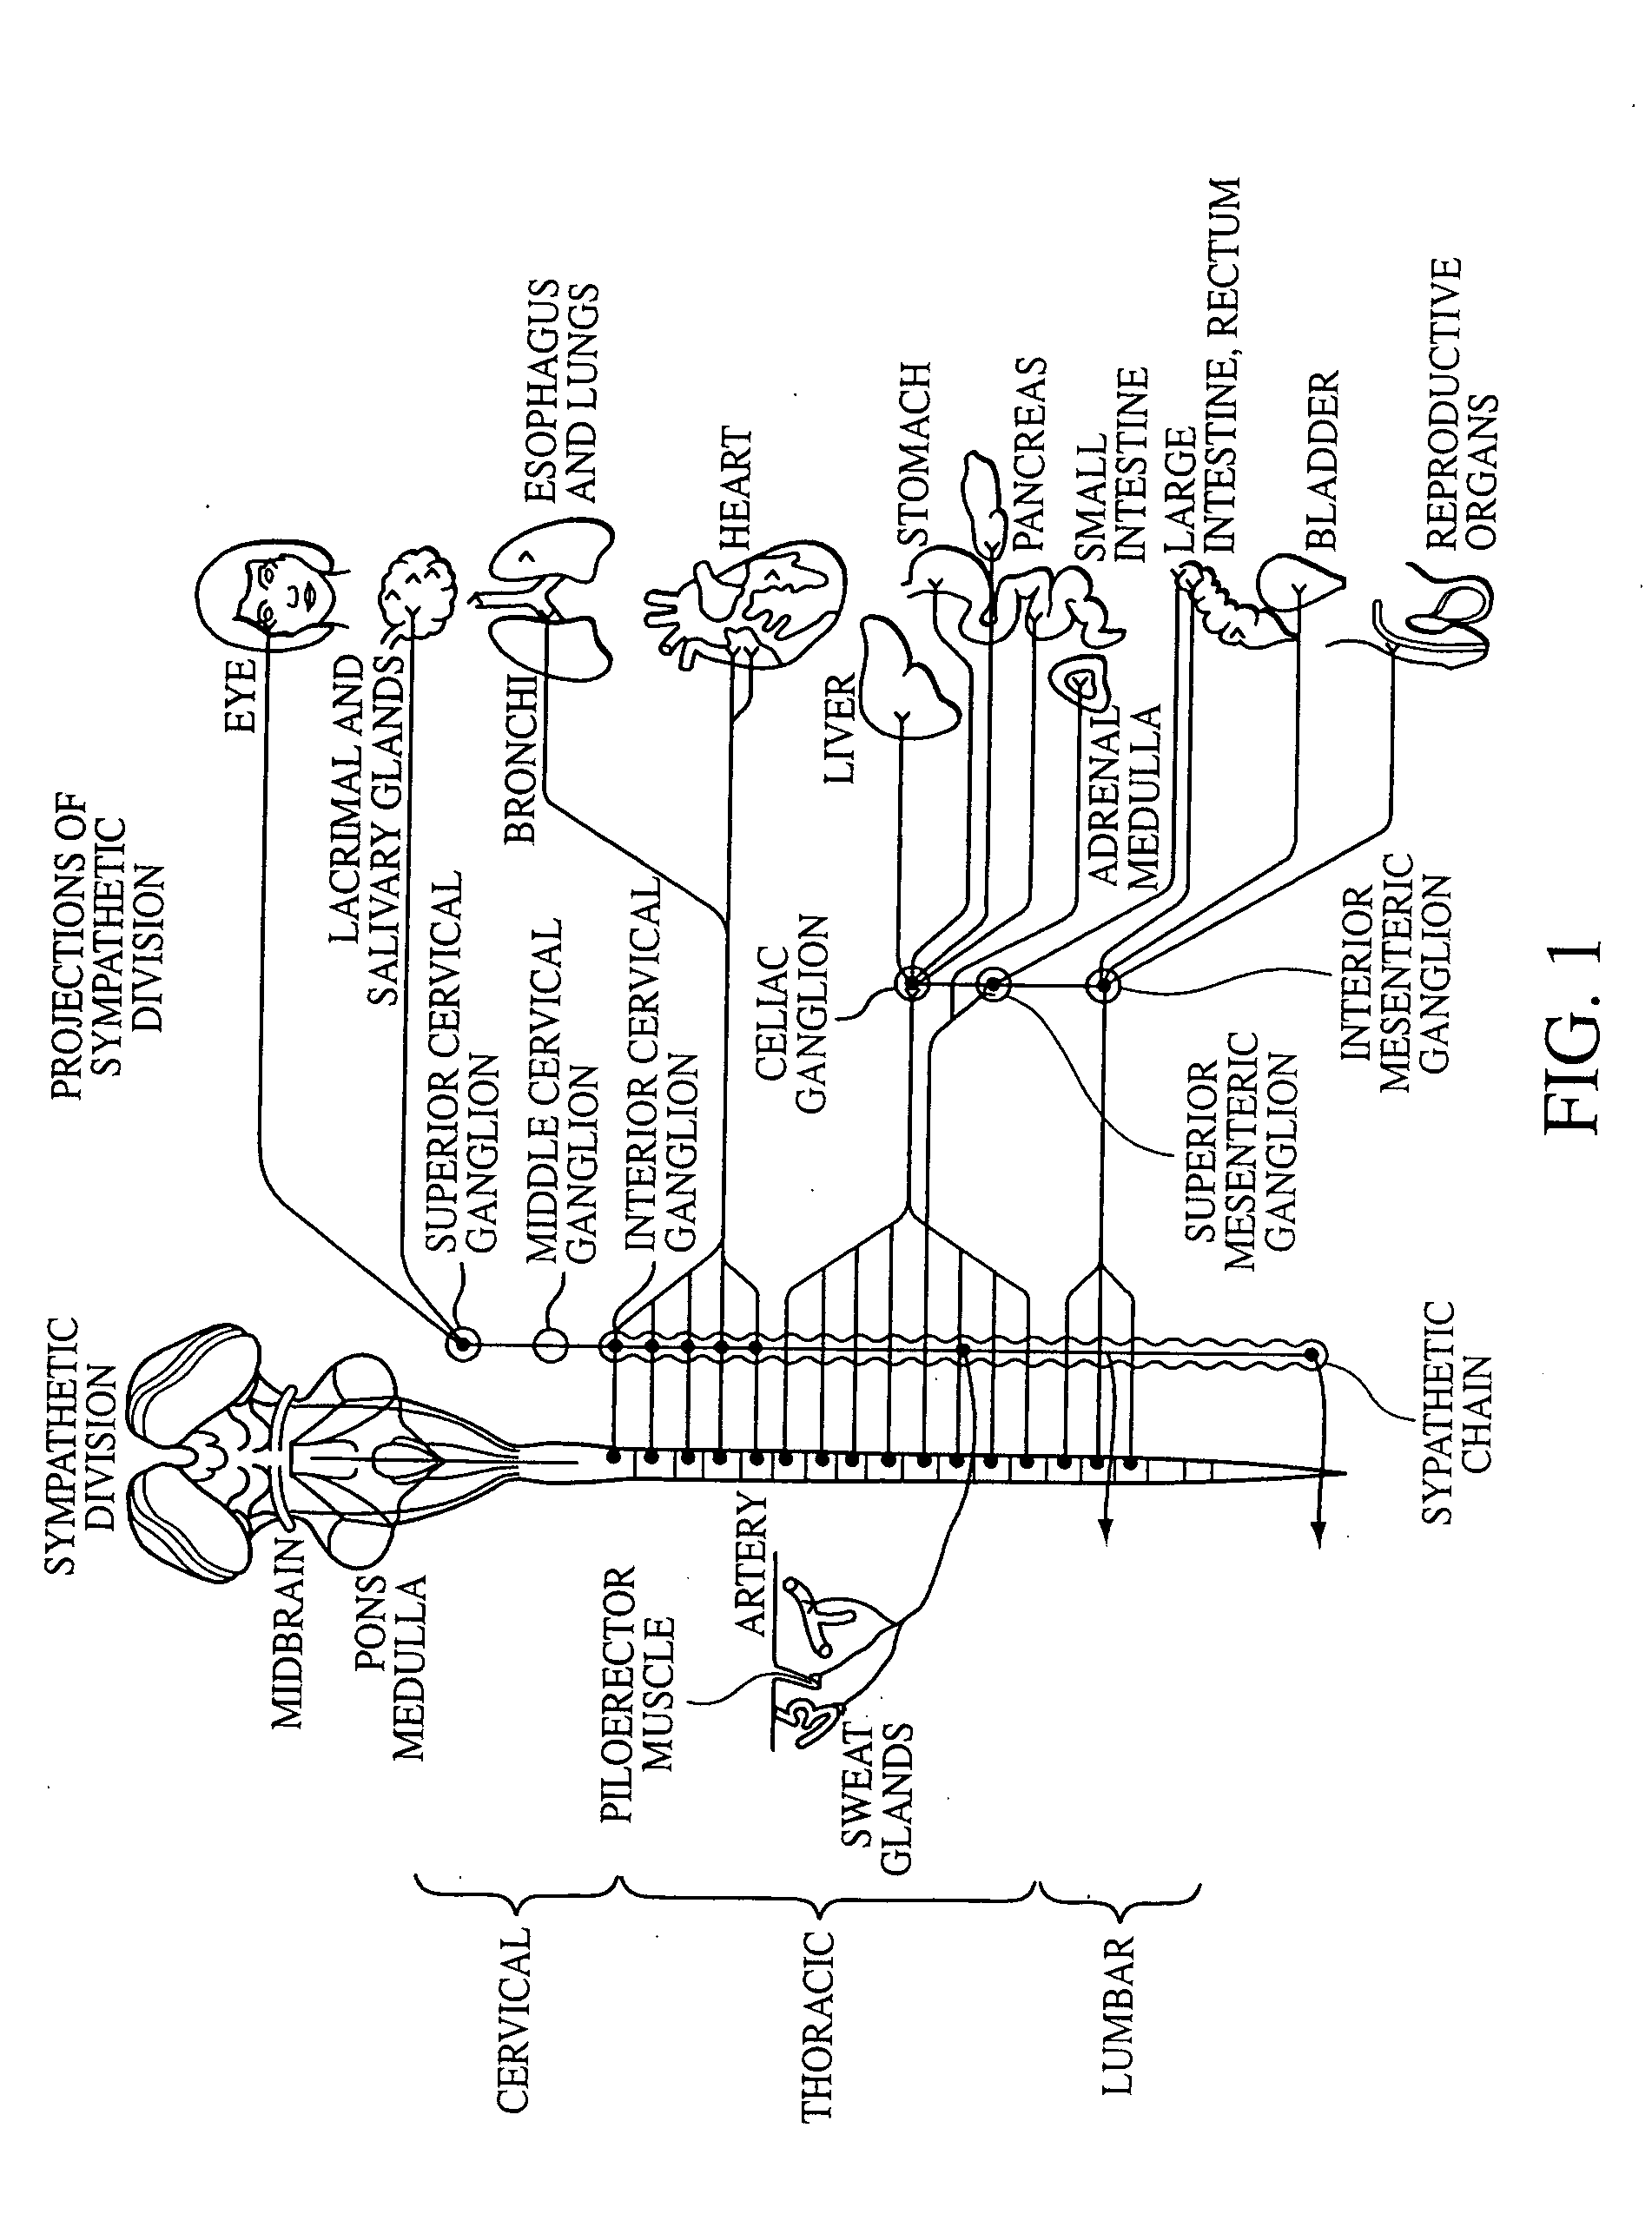 Electrical stimulation of the sympathetic nerve chain